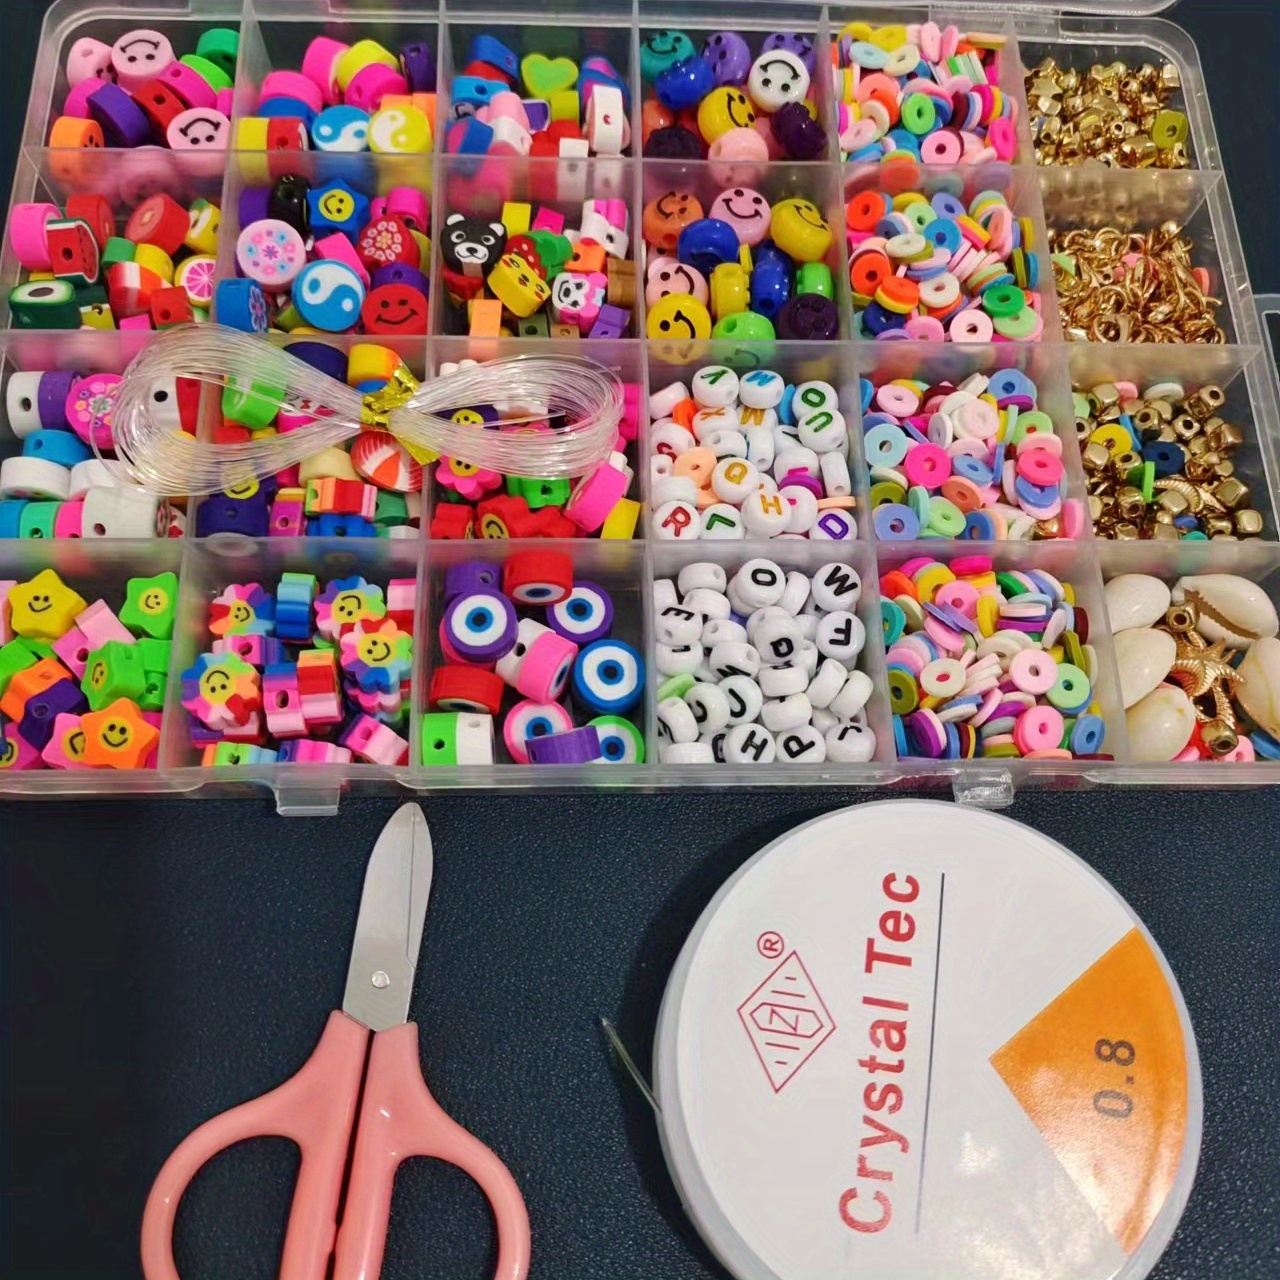 1140 Pcs Polymer Clay Bead Kit, Flower Smiley Face Beads Mixed Fruit Spacer  Beads,Charms For Bracelet Jewelry Making